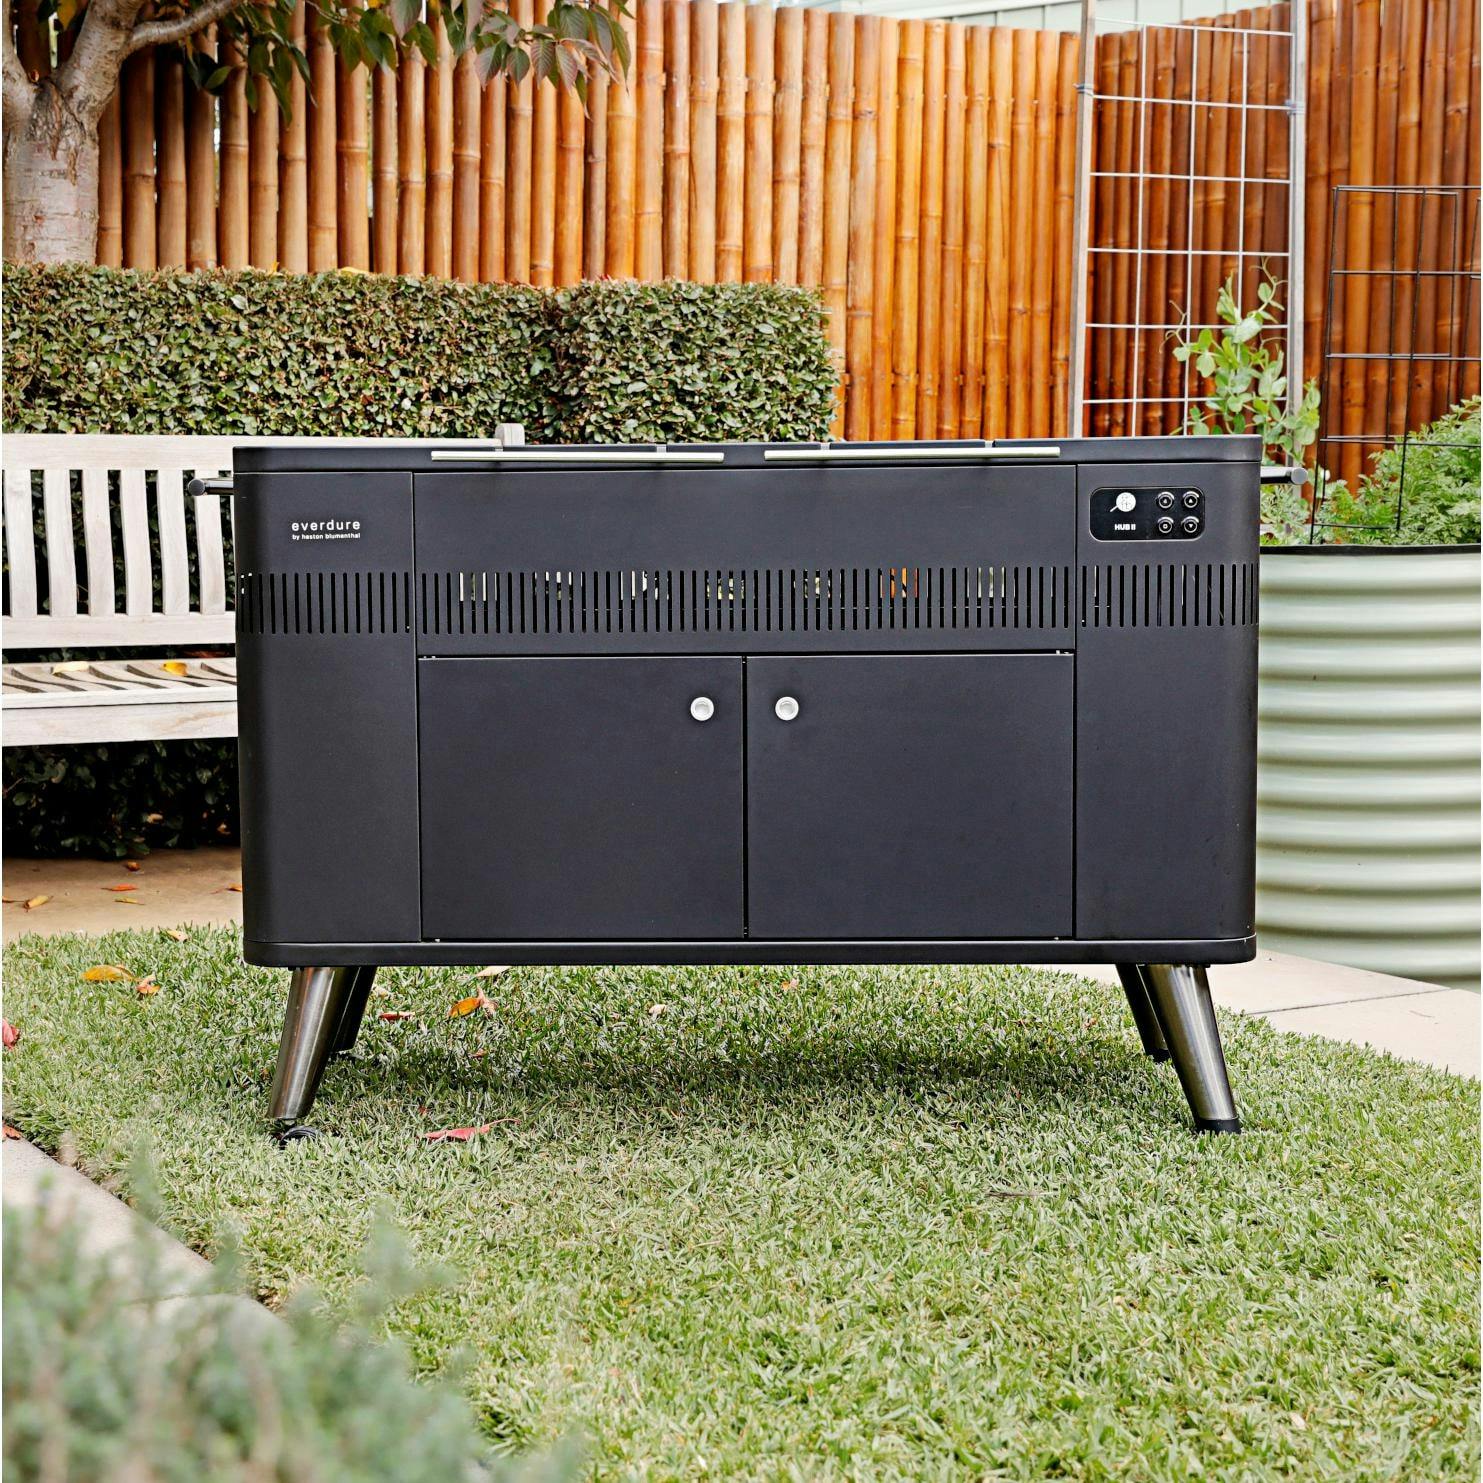 Everdure By Heston Blumenthal Charcoal Grill With Rotisserie & Electronic Ignition